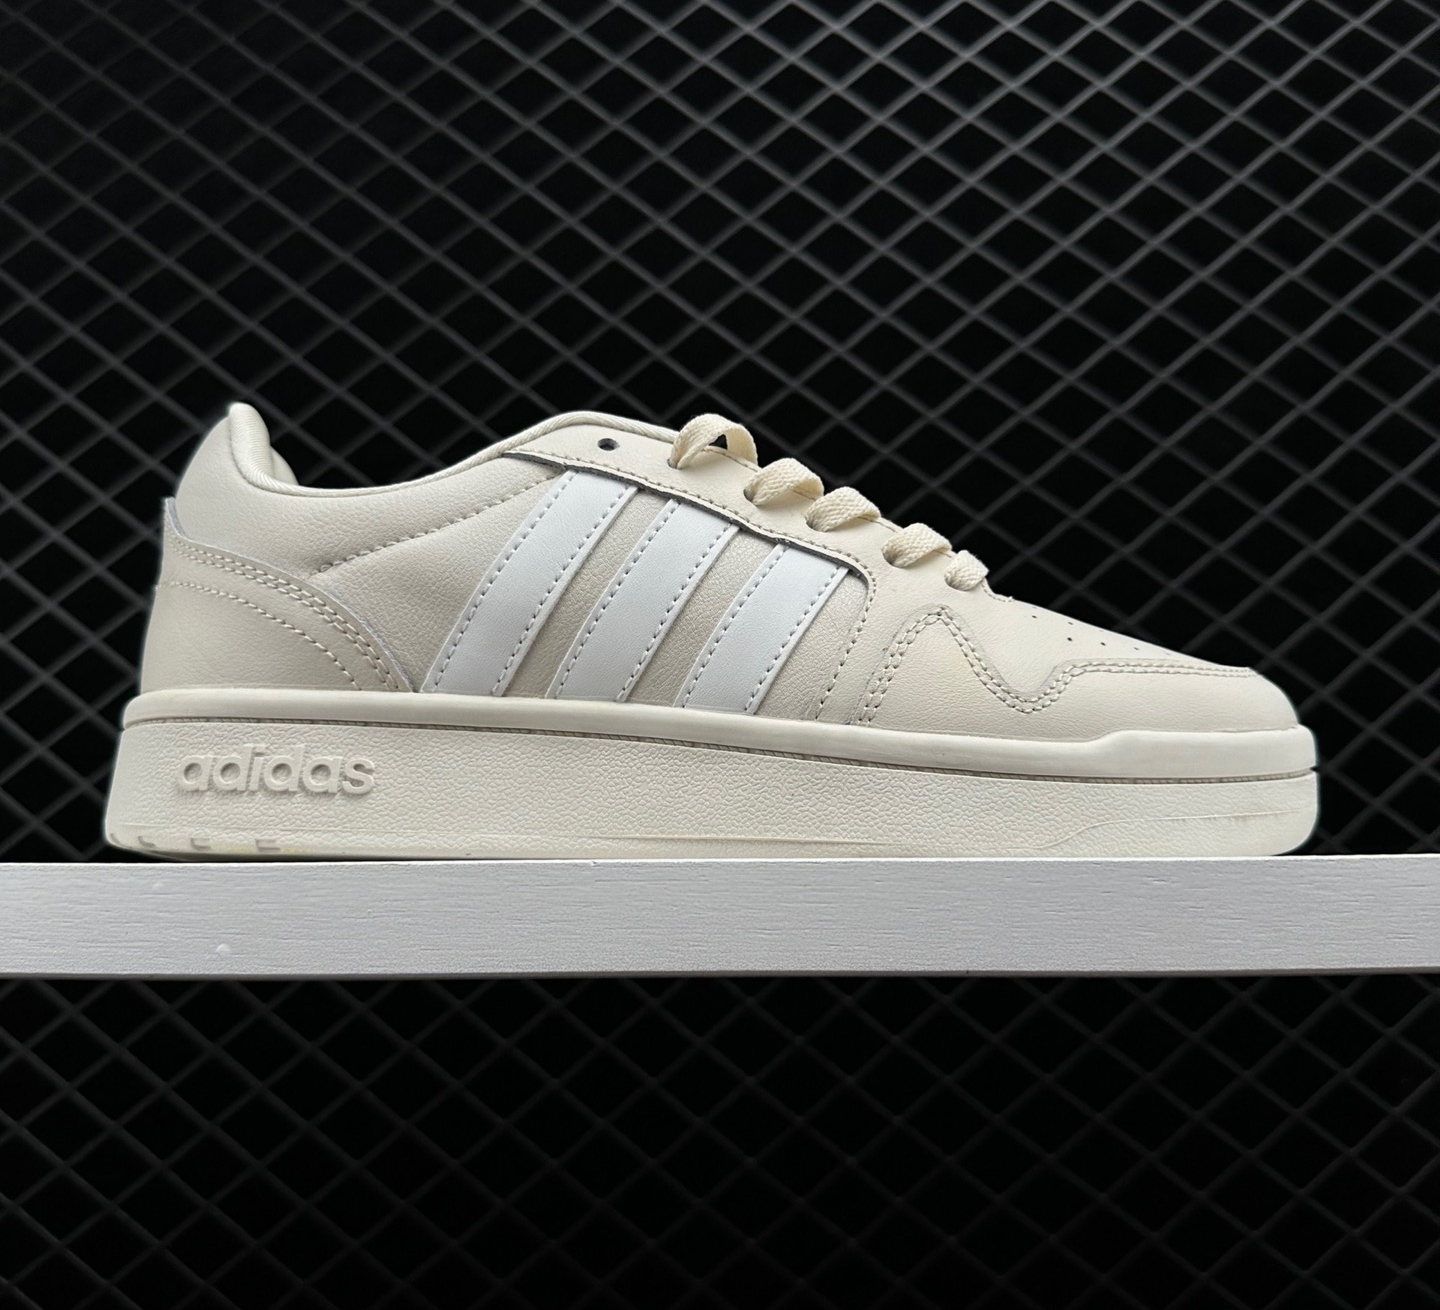 Adidas Postmove Casual Shoes 'Triple White' - Lightweight and Stylish Footwear